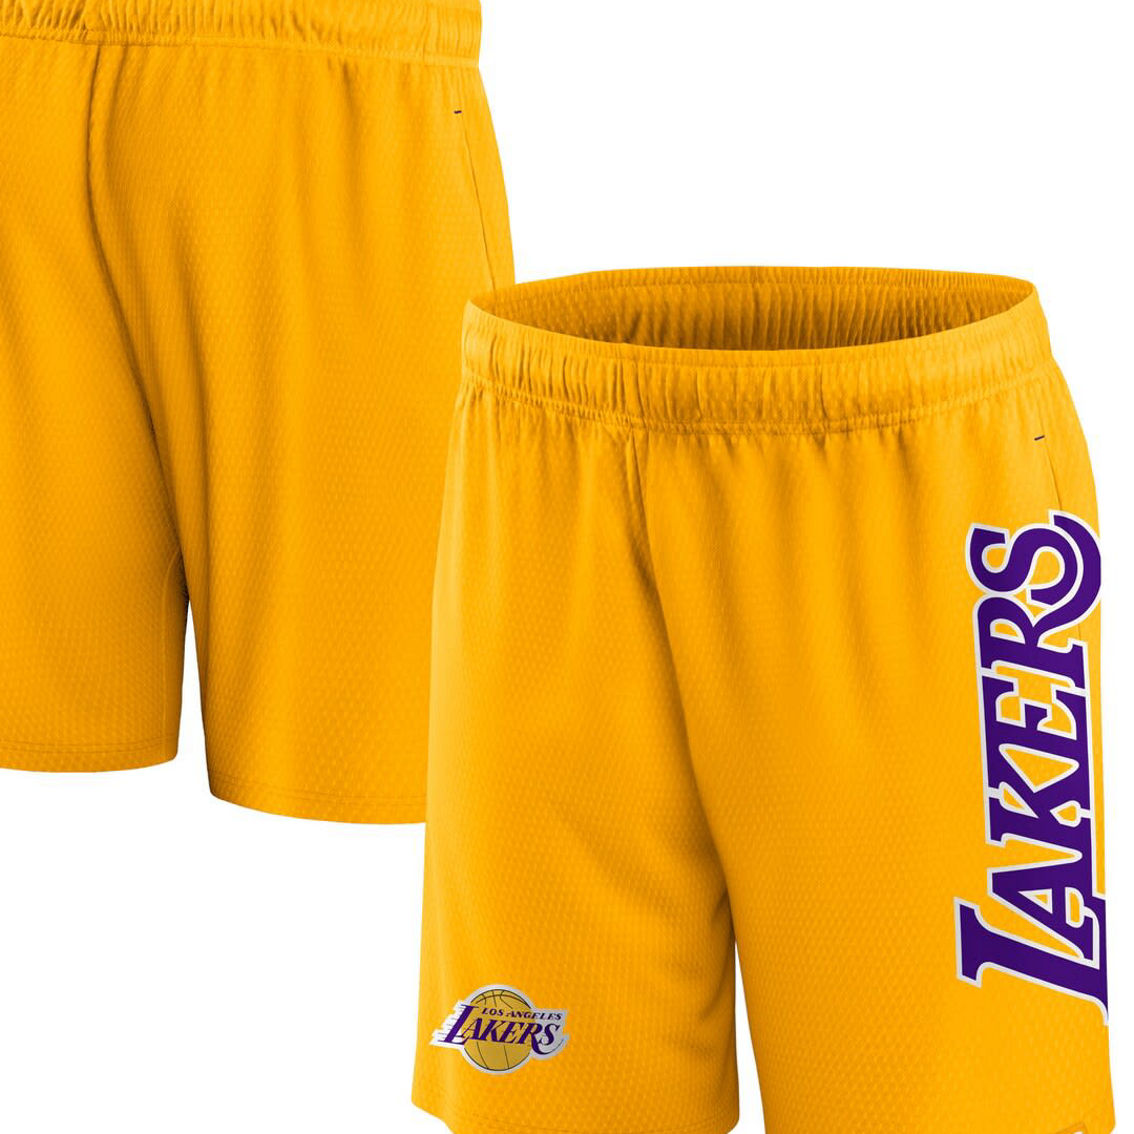 Fanatics Branded Men's Gold Los Angeles Lakers Up Mesh Shorts - Image 2 of 4